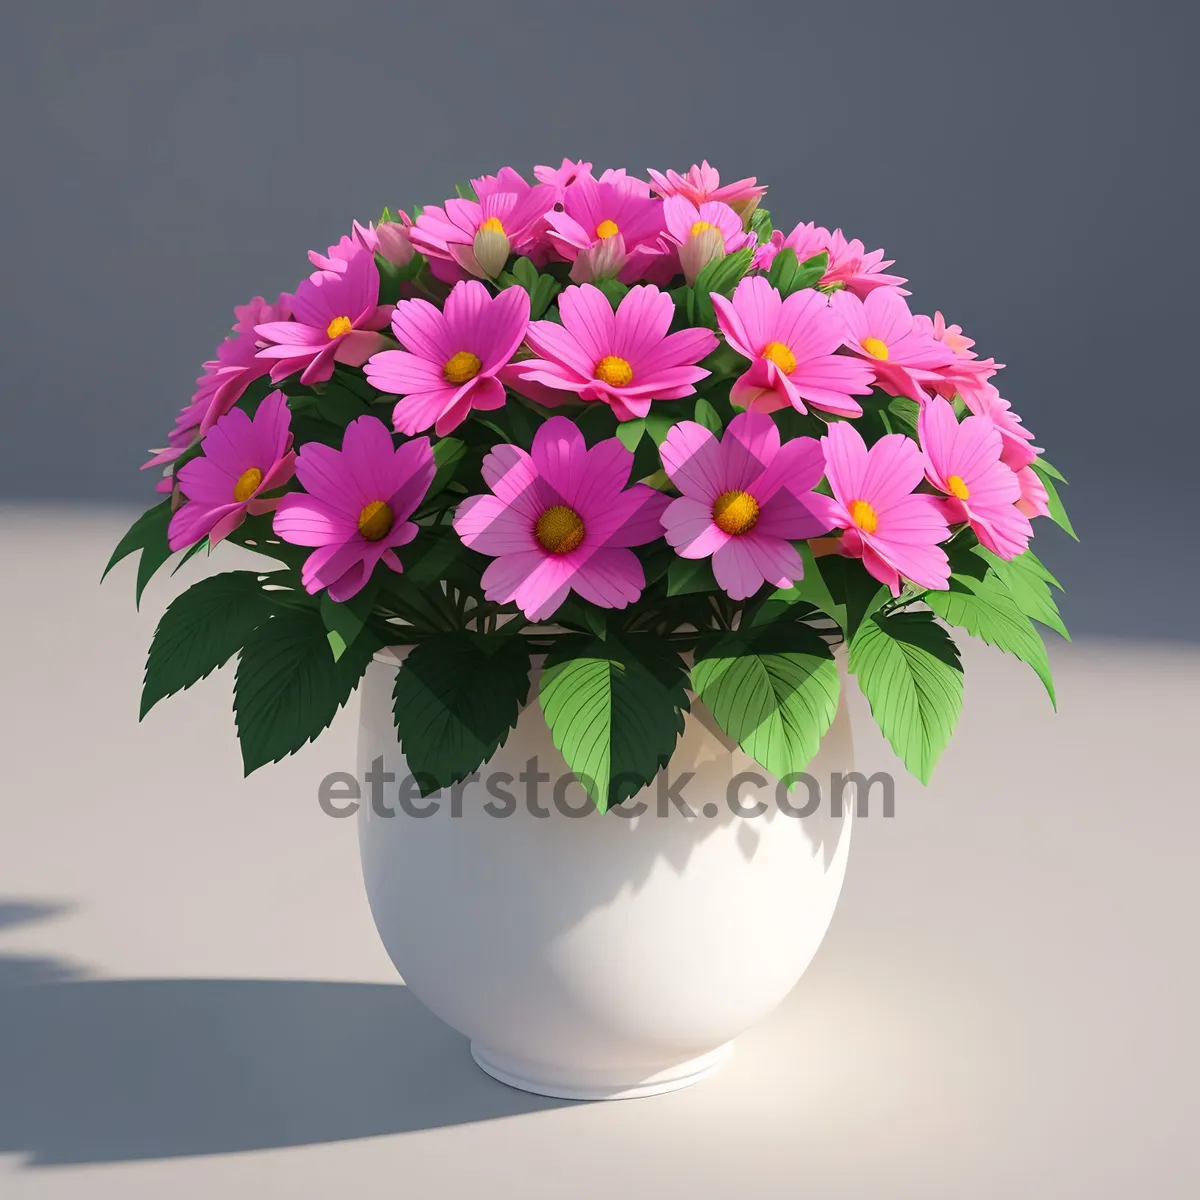 Picture of Vibrant Pink Floral Bouquet in Spring Garden